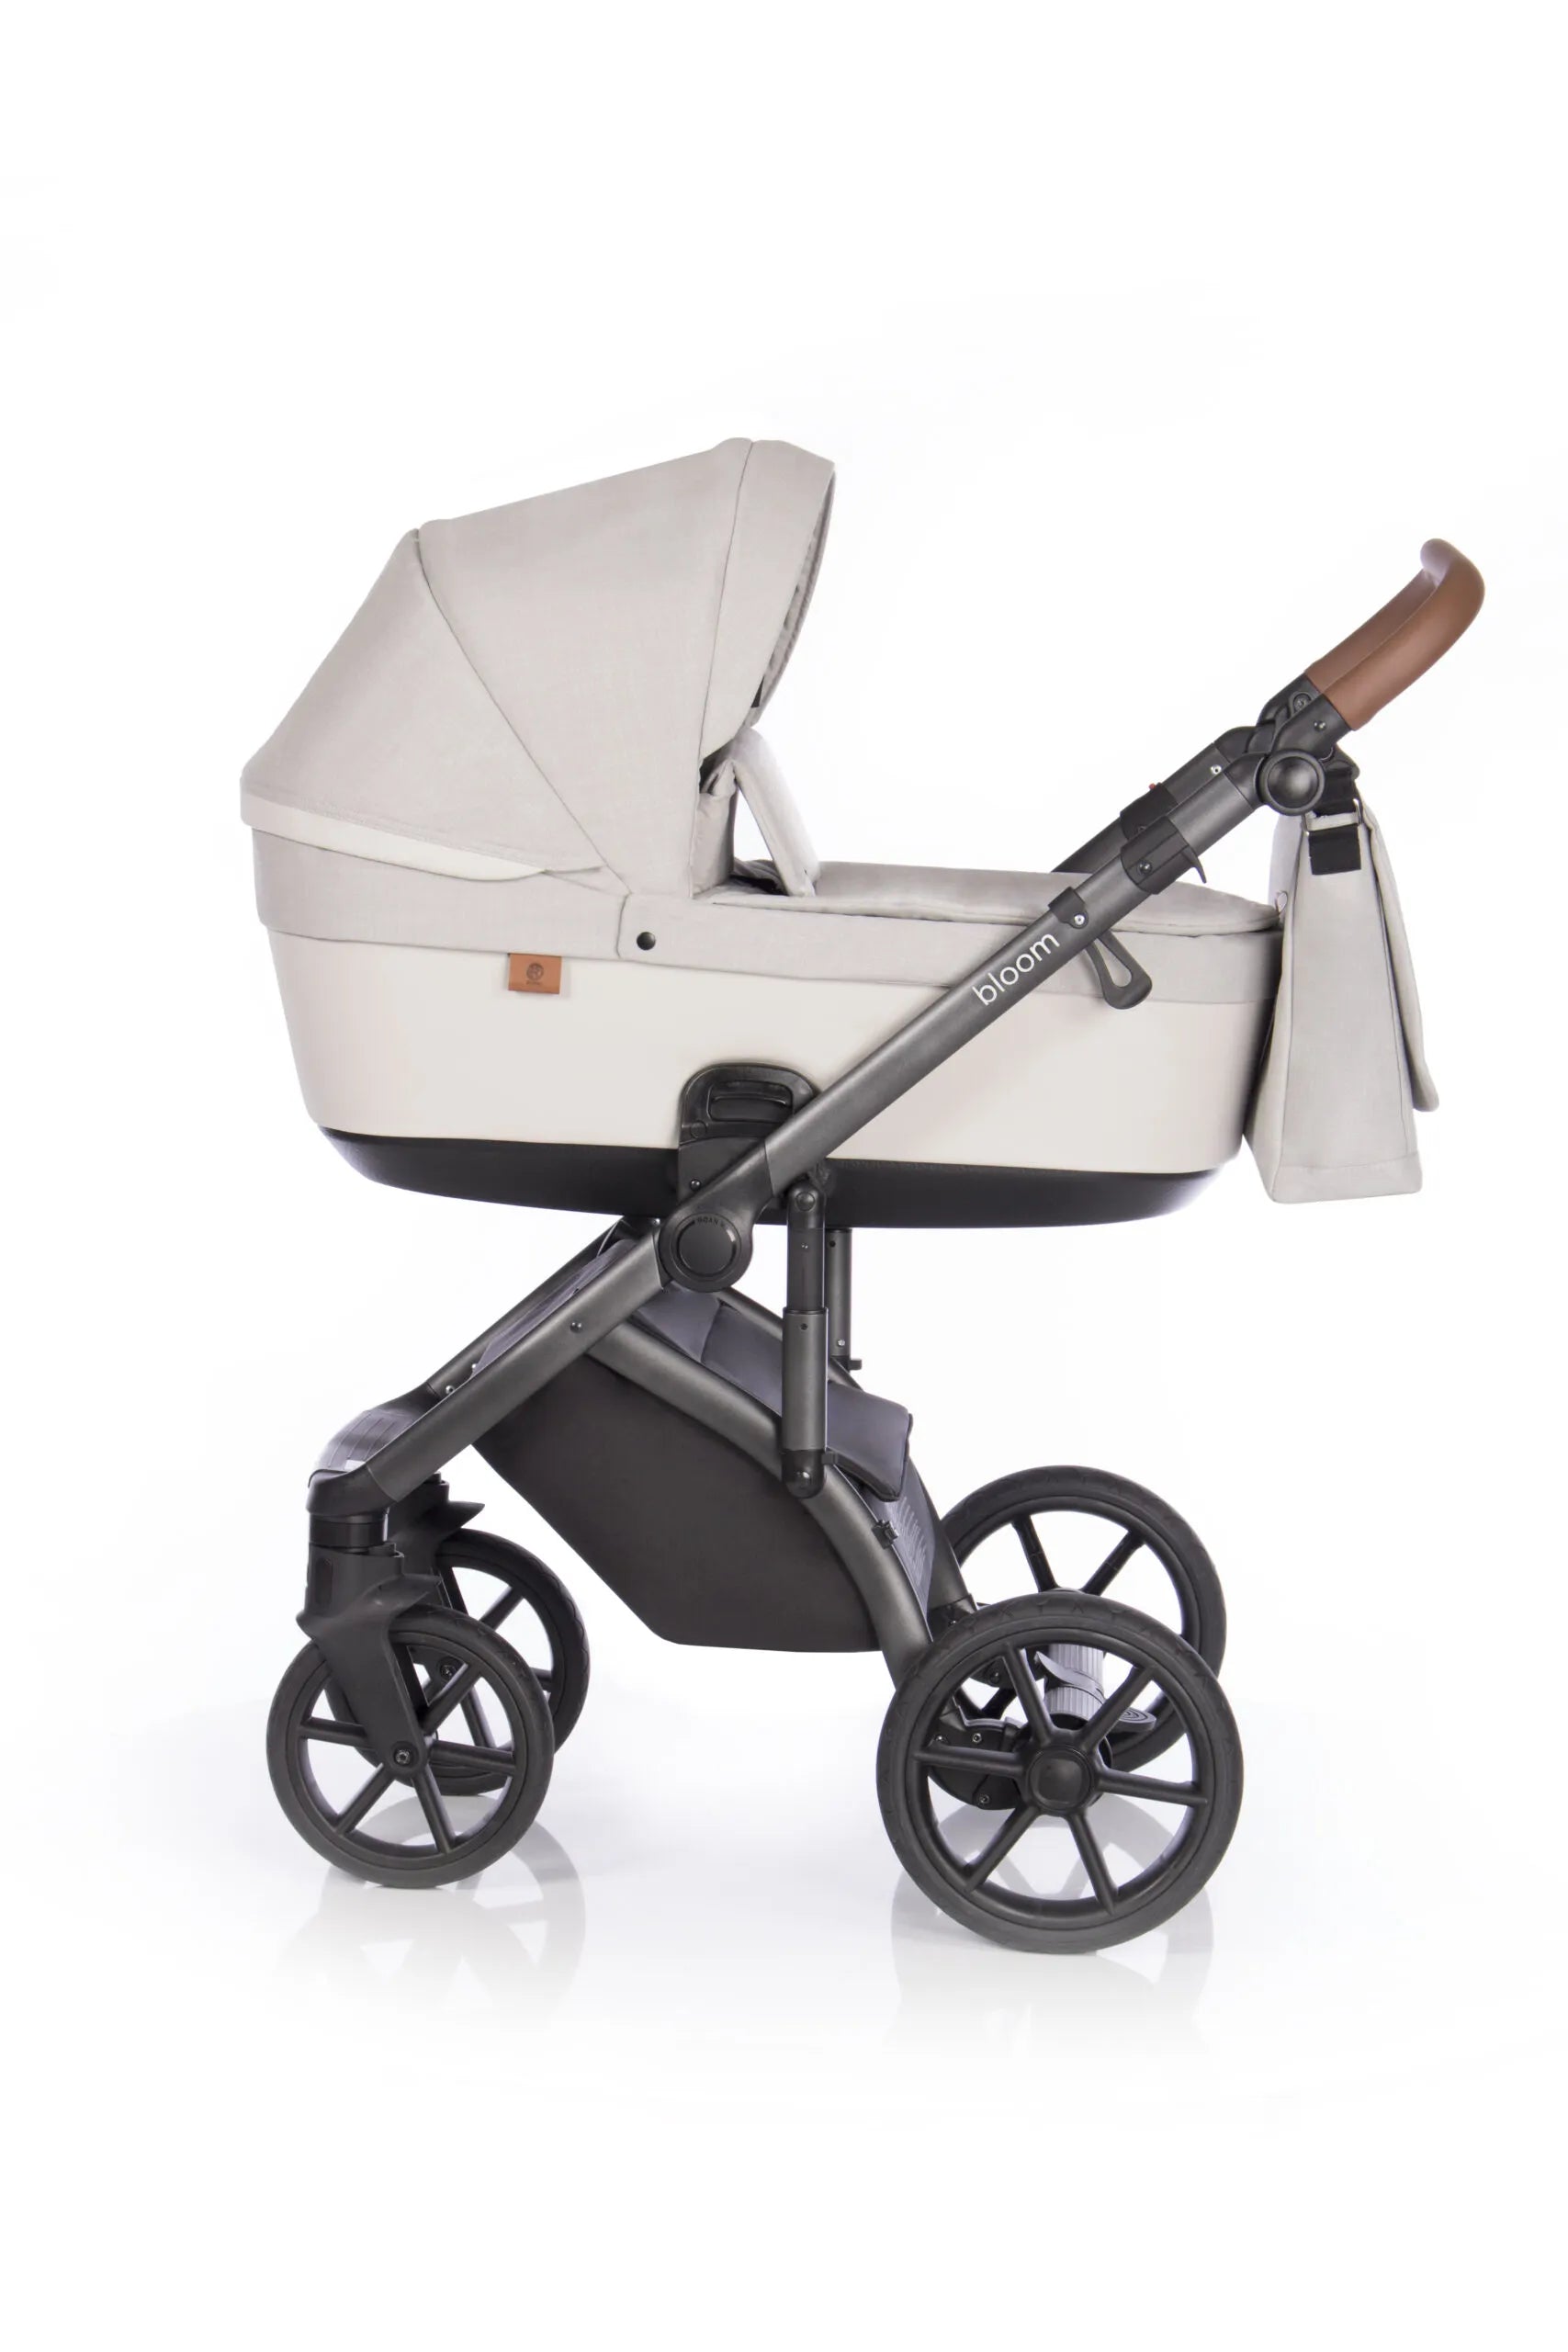 Roan BLOOM baby stroller 2 in 1, carry cot and stroller, color Ivory